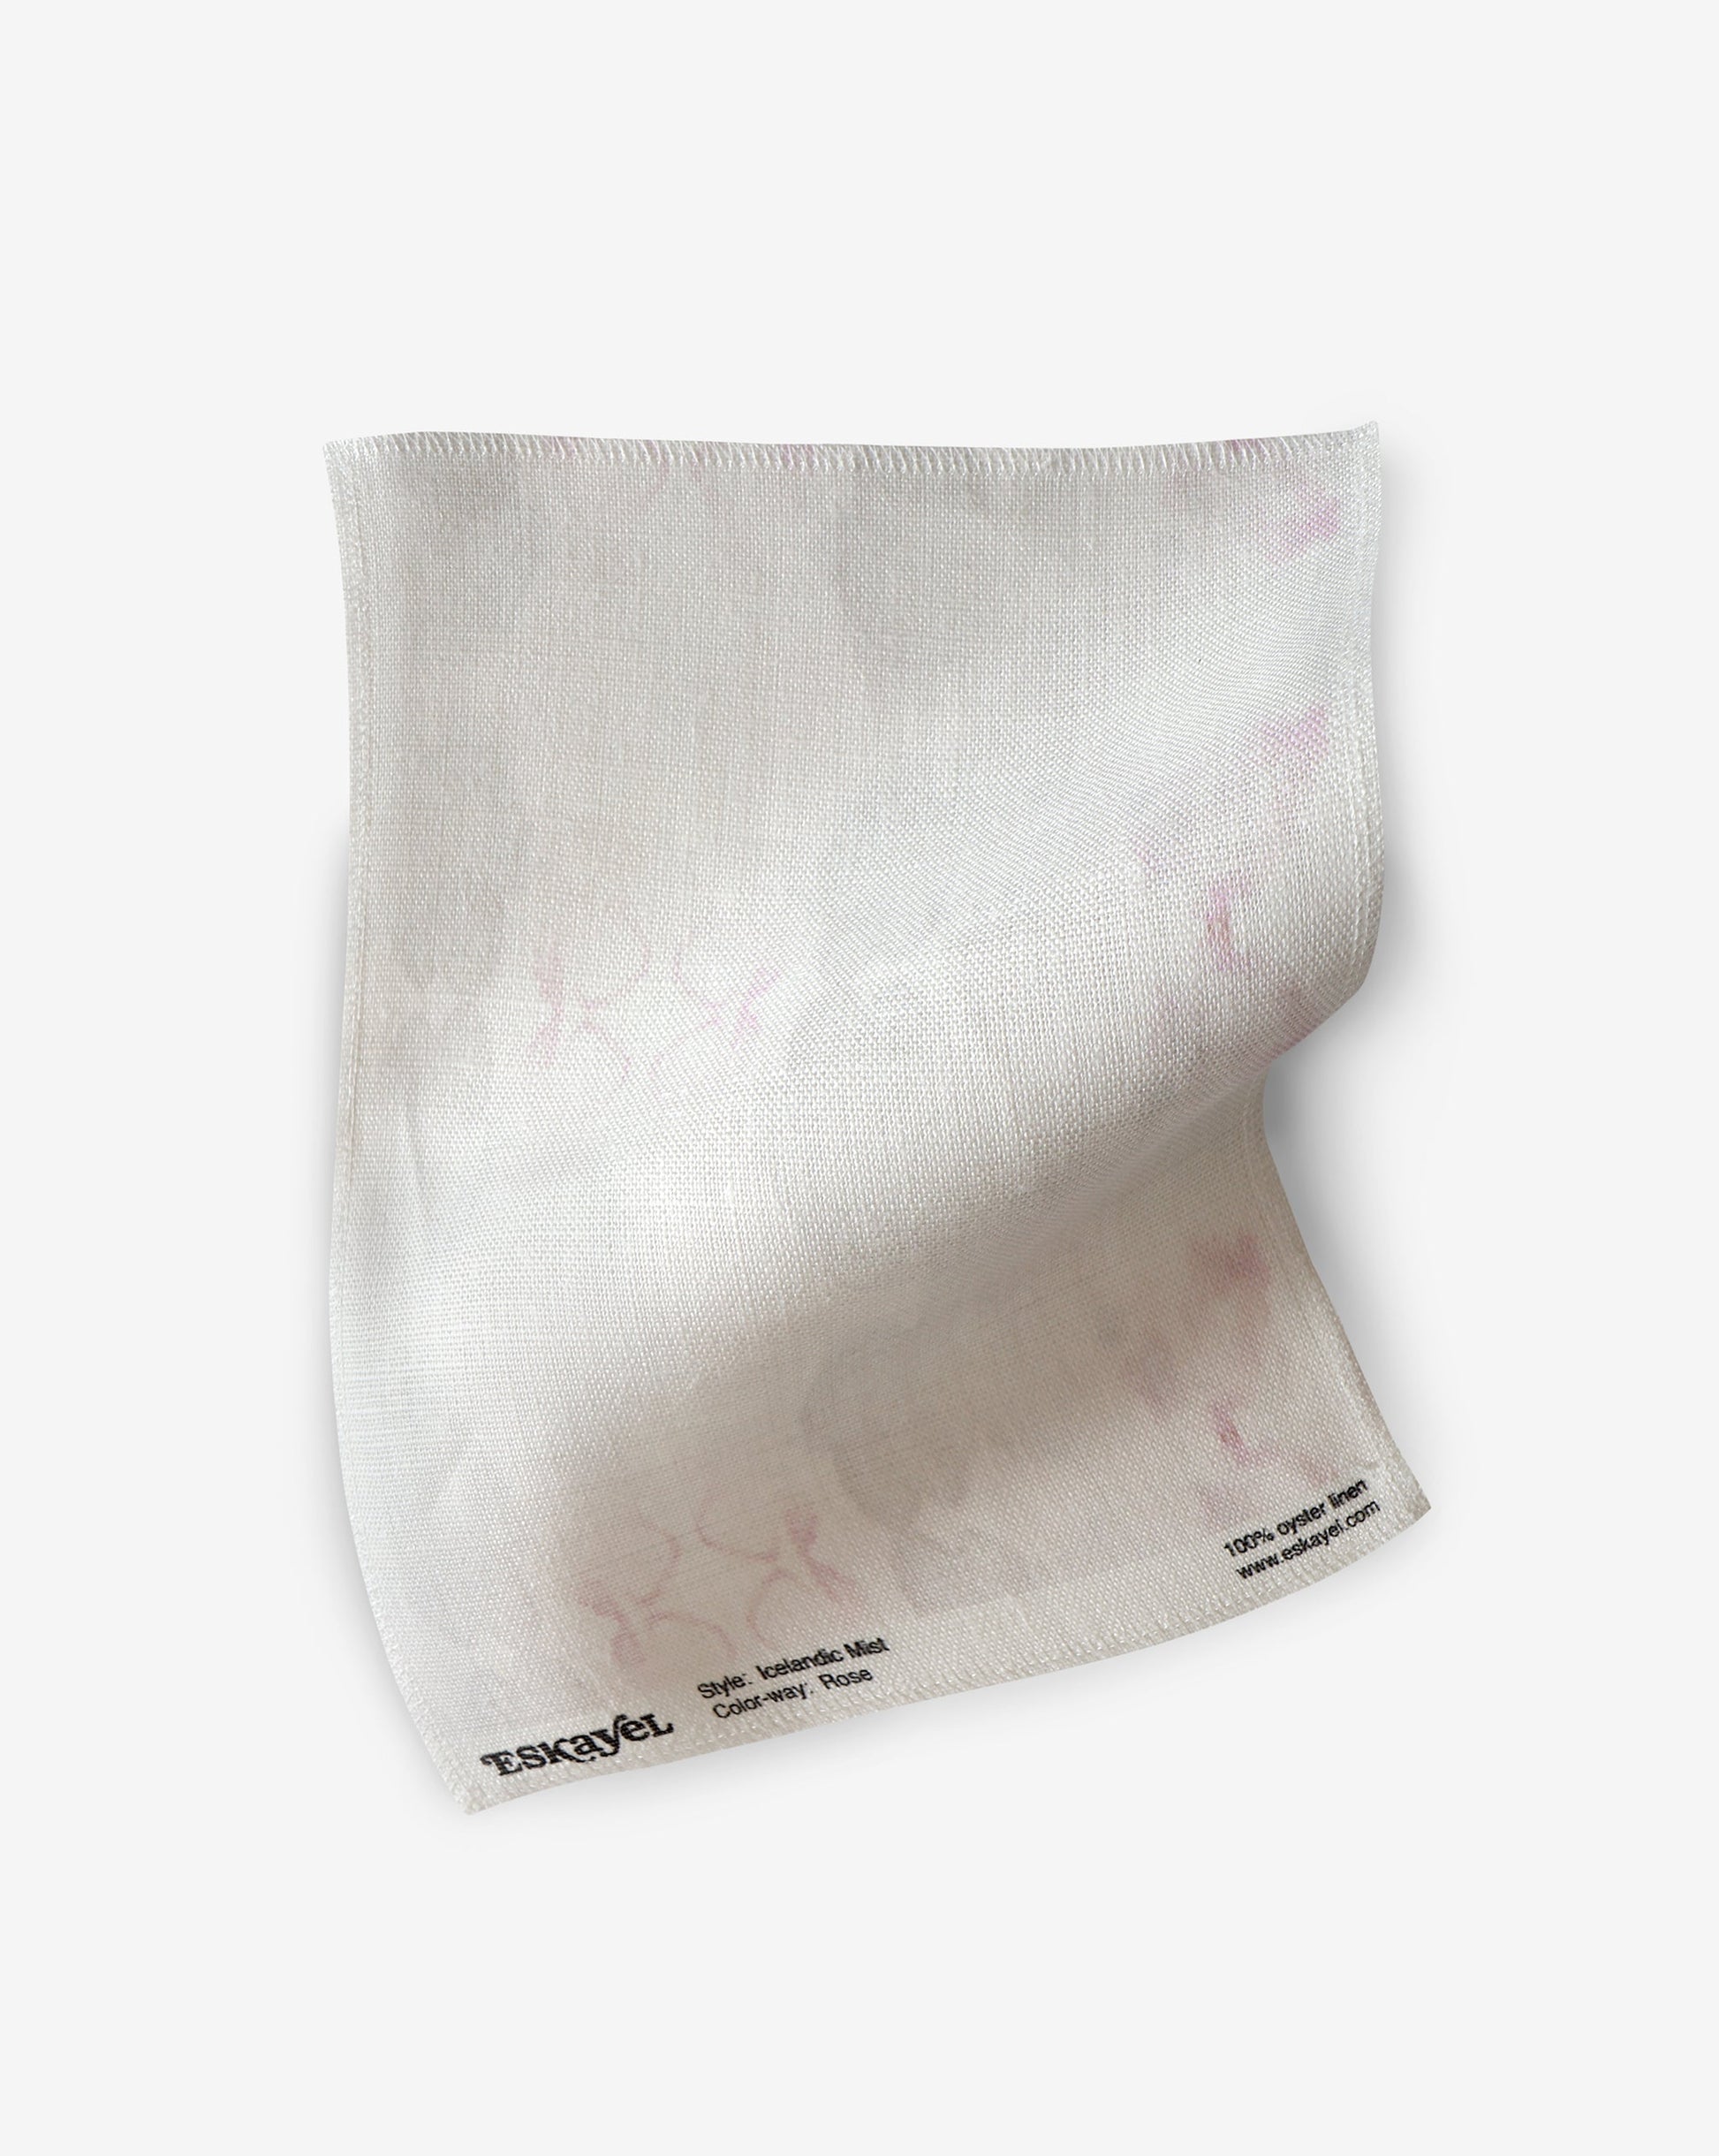 An Icelandic Mist Fabric Sample Rose on a white surface can be used as a sample for your order